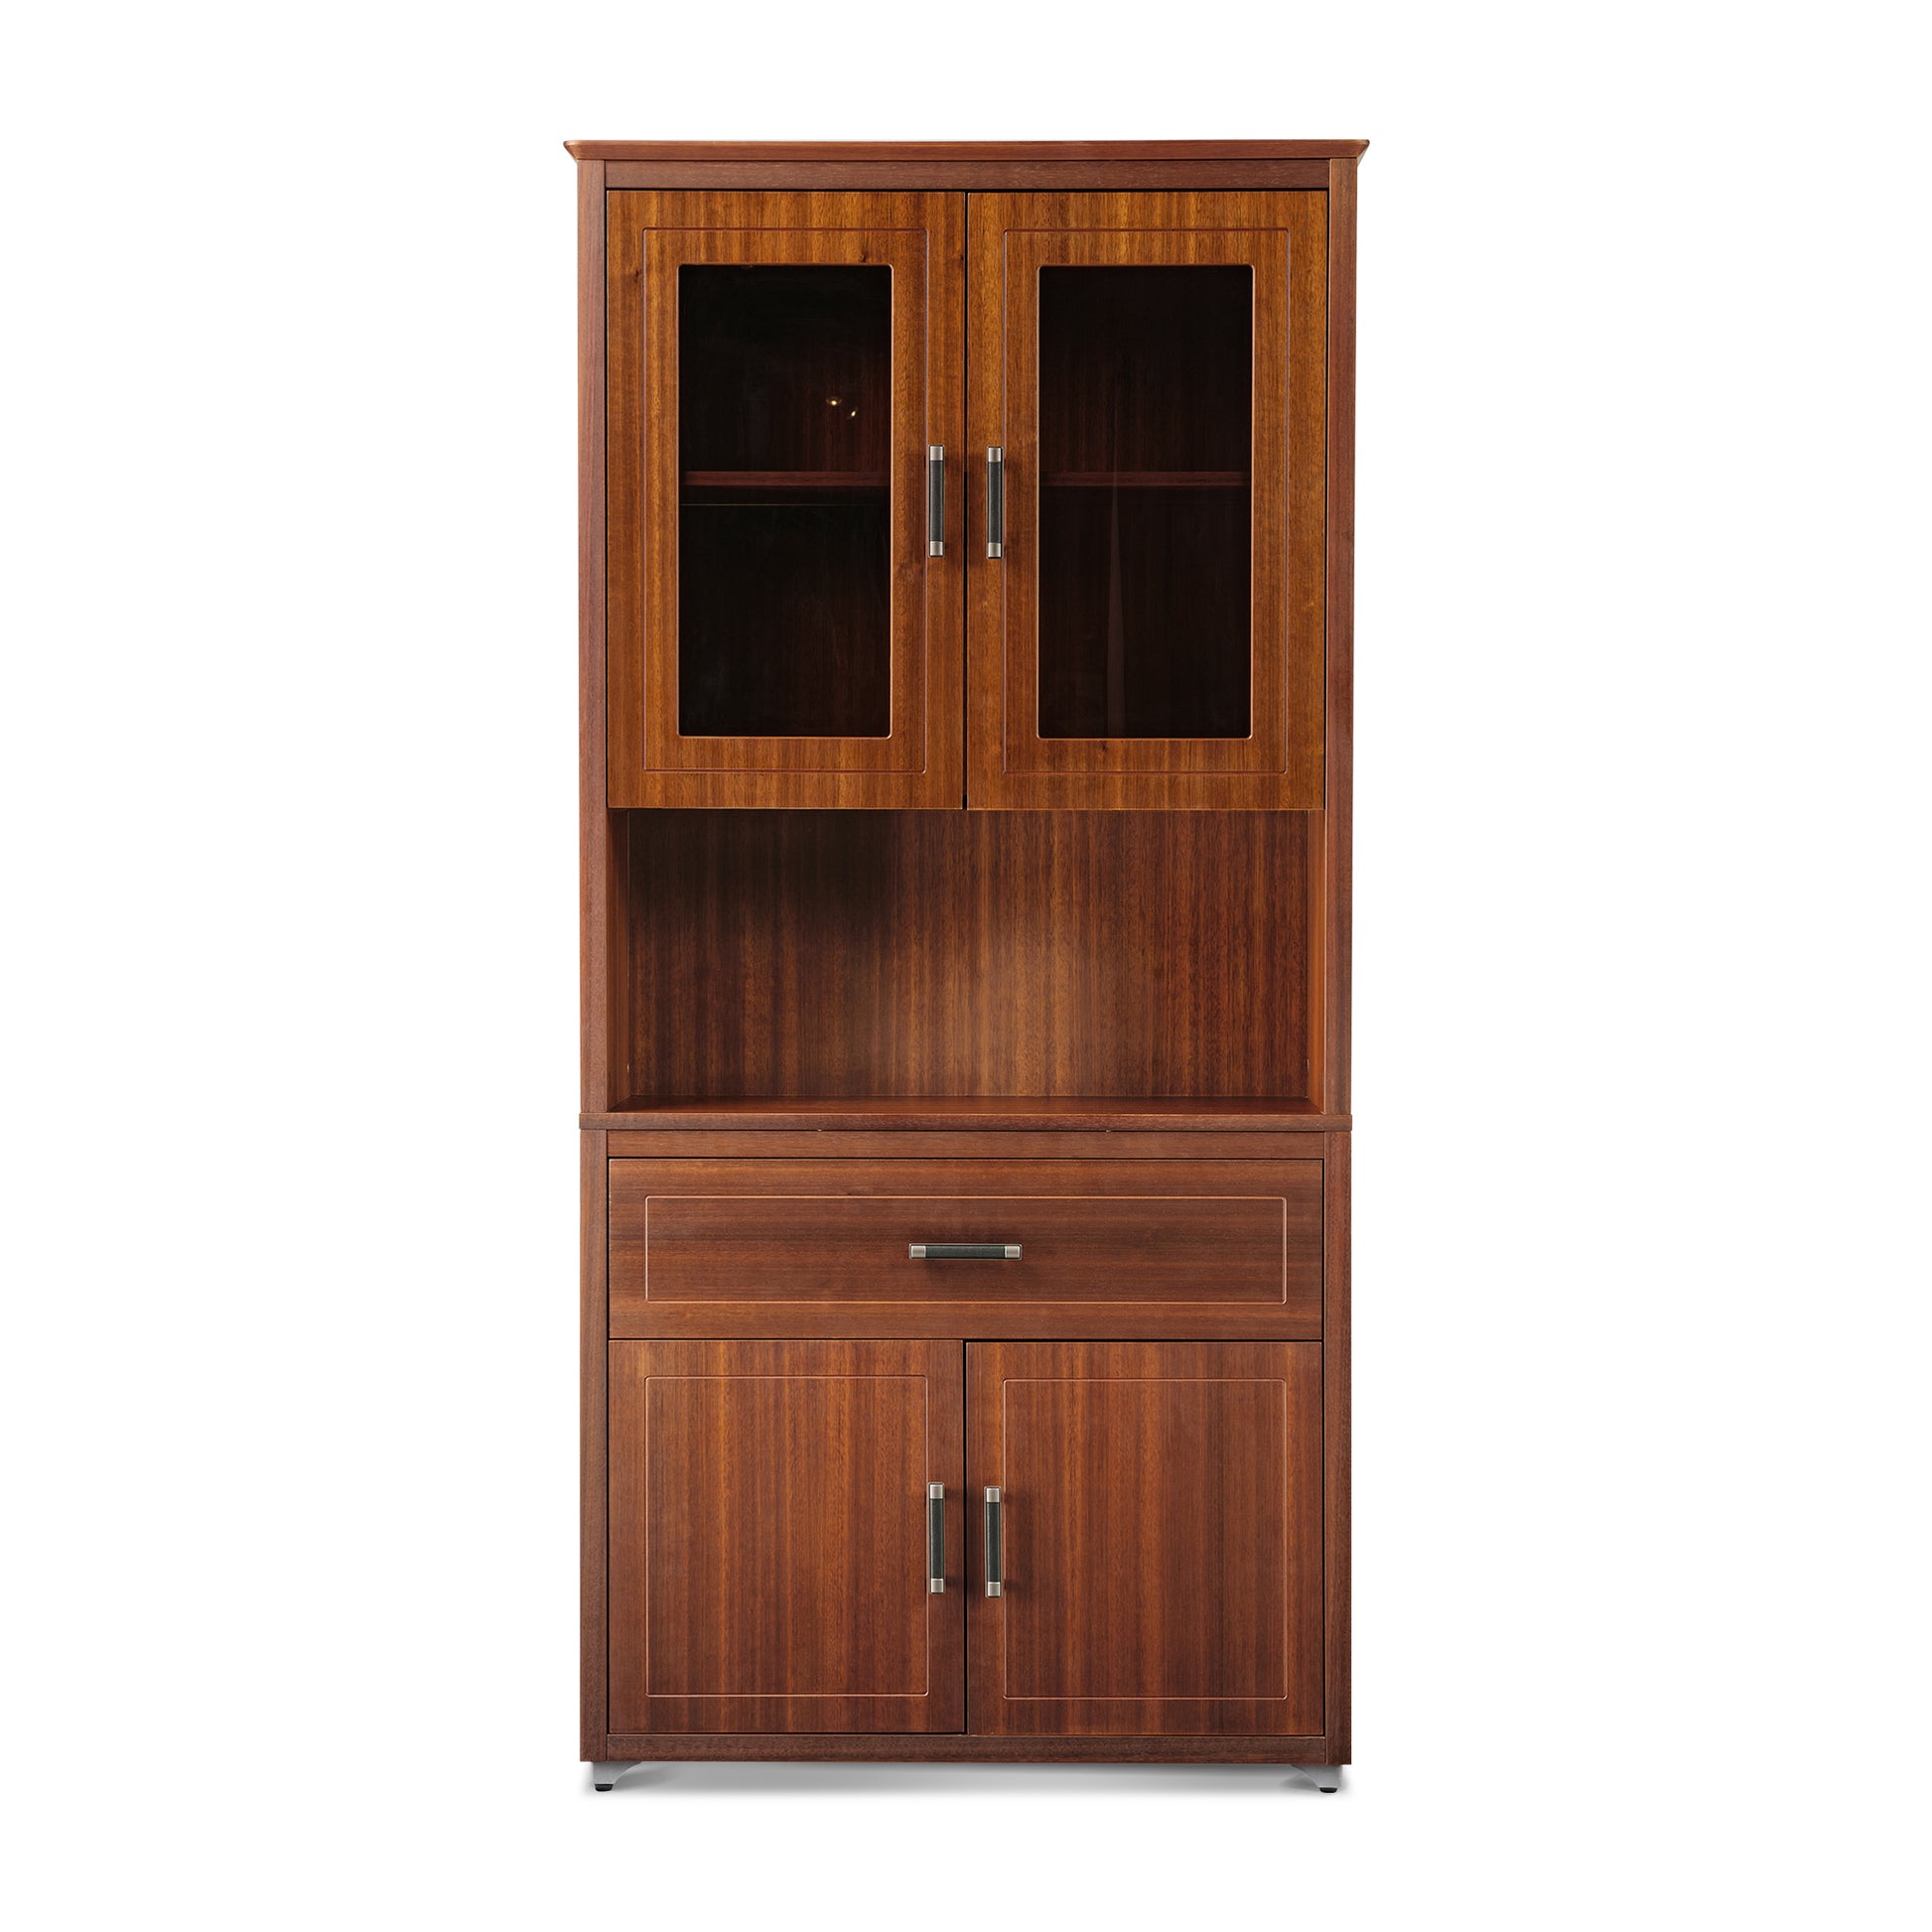 Executive Ark Collection, 72 inch Storage Cabinet Bookshelf with Doors, Walnut with Empty Front Image